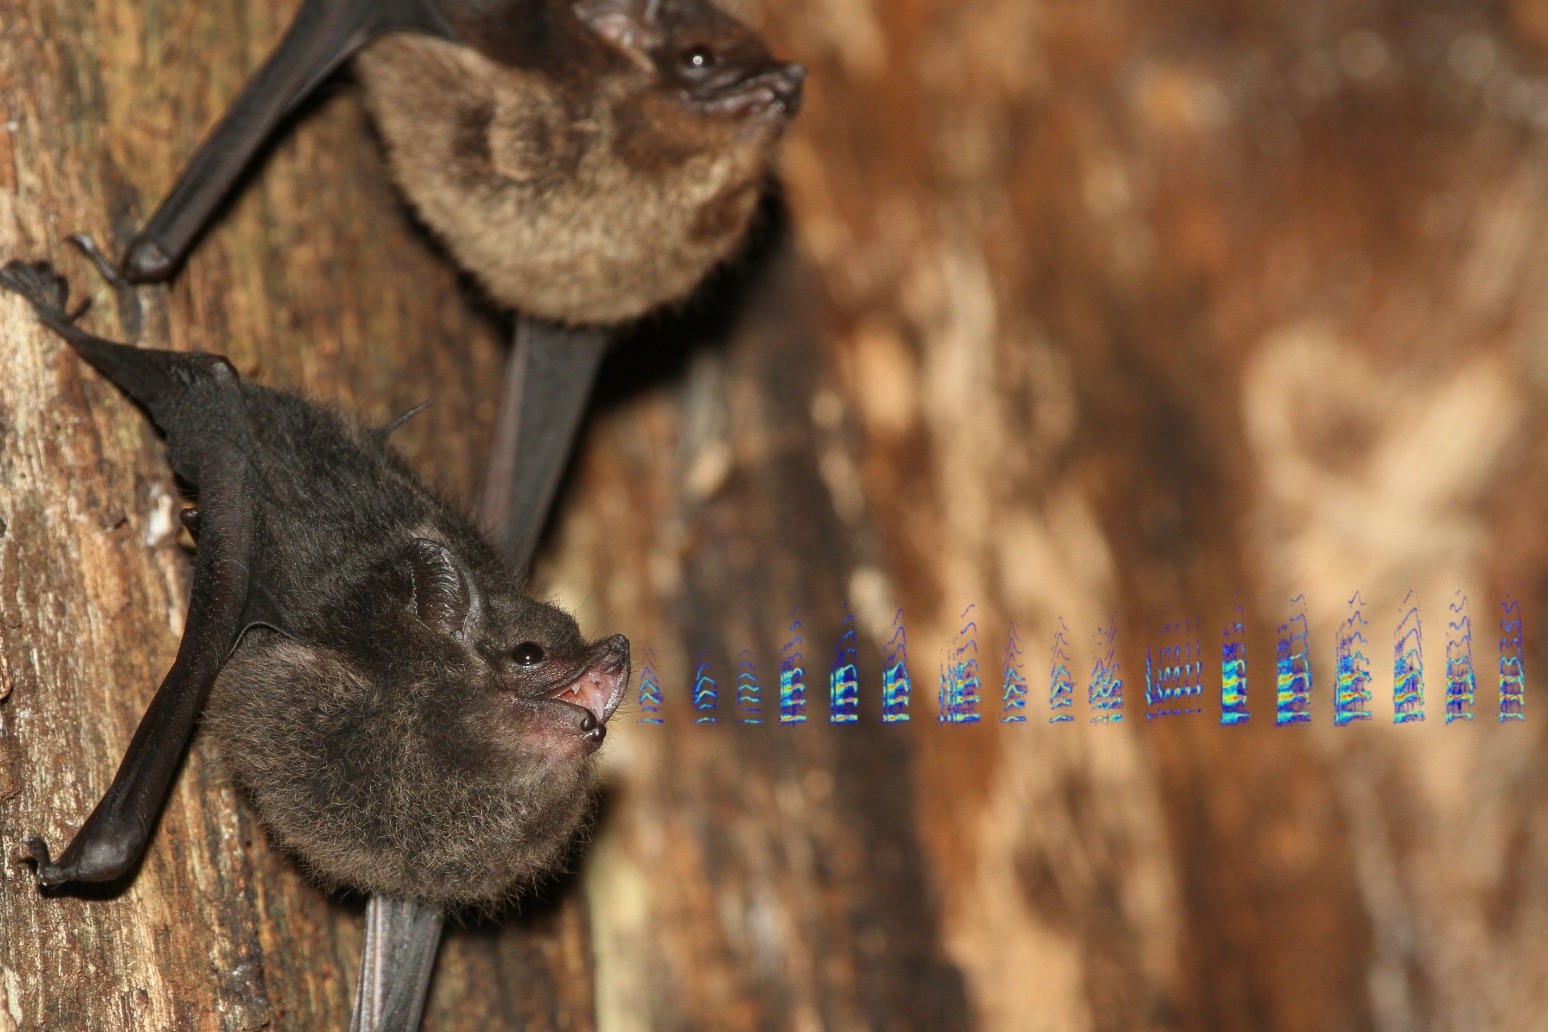 Baby bats babble like human infants, research suggests 